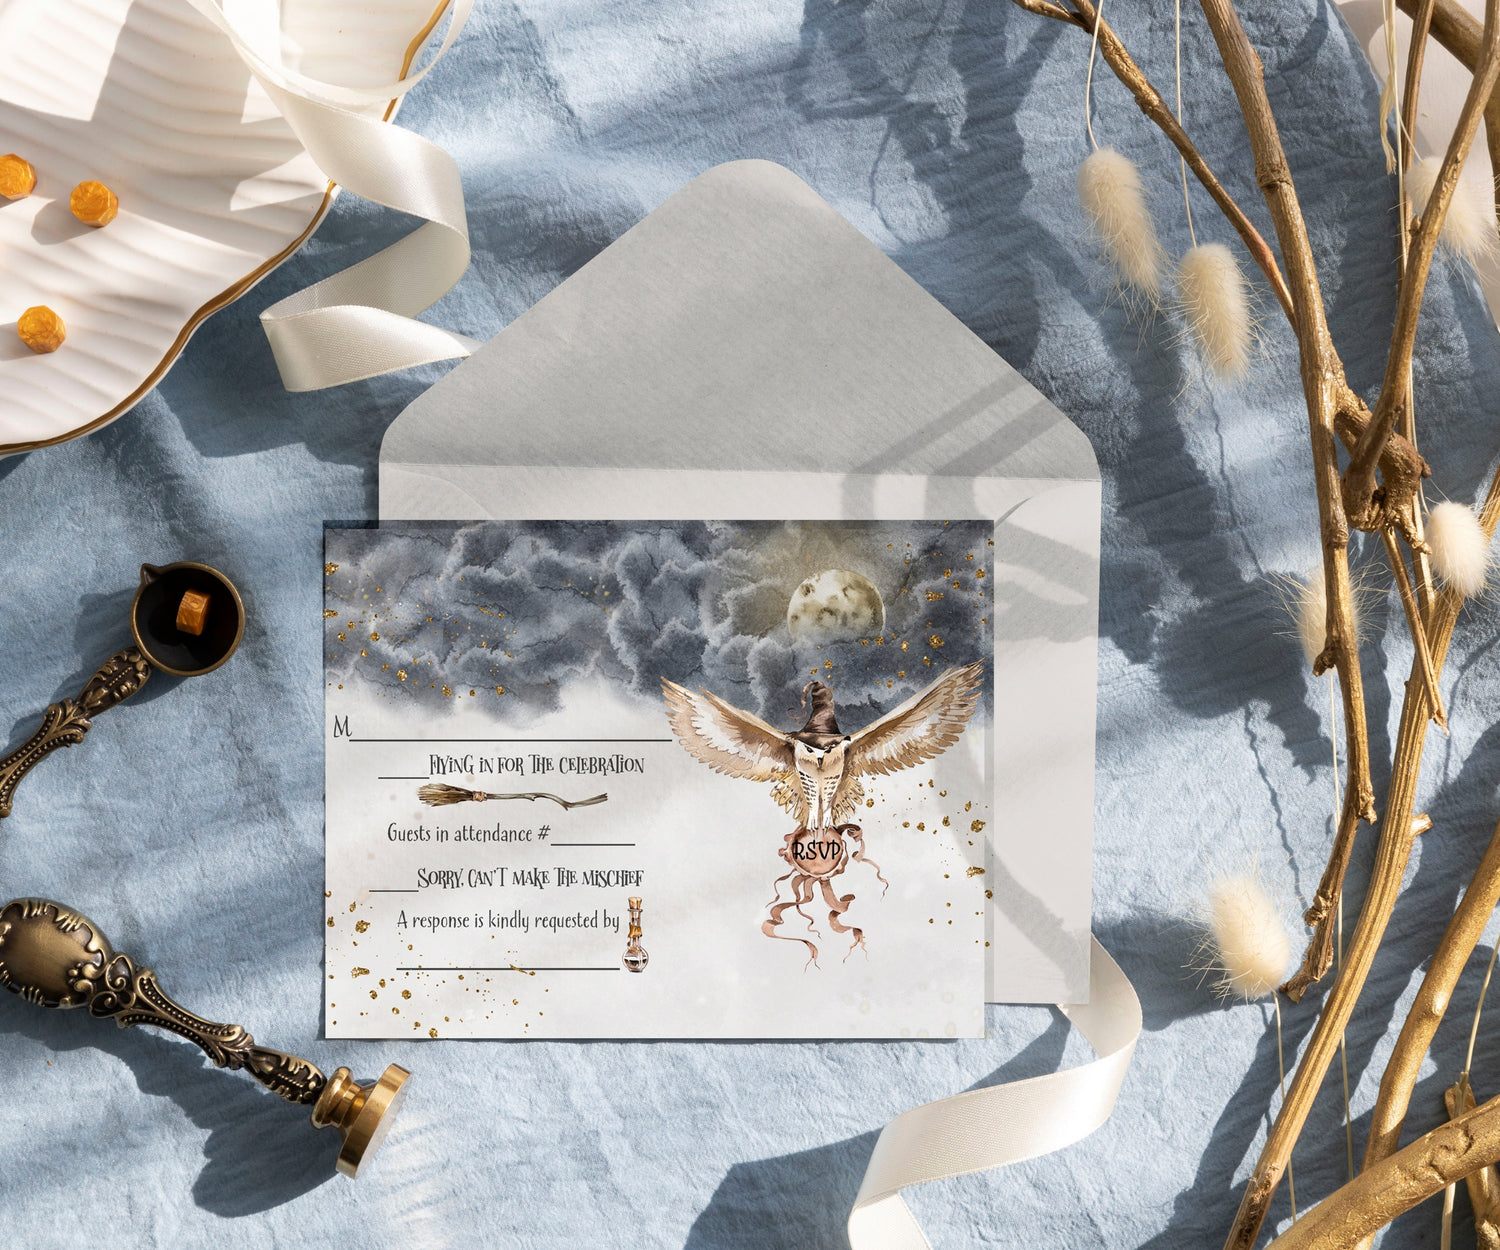 Enchant your guests with our Owl & Wizard Themed Party Supplies—magical black and gold invitations, cards, and games for a spellbinding wedding or bridal event.